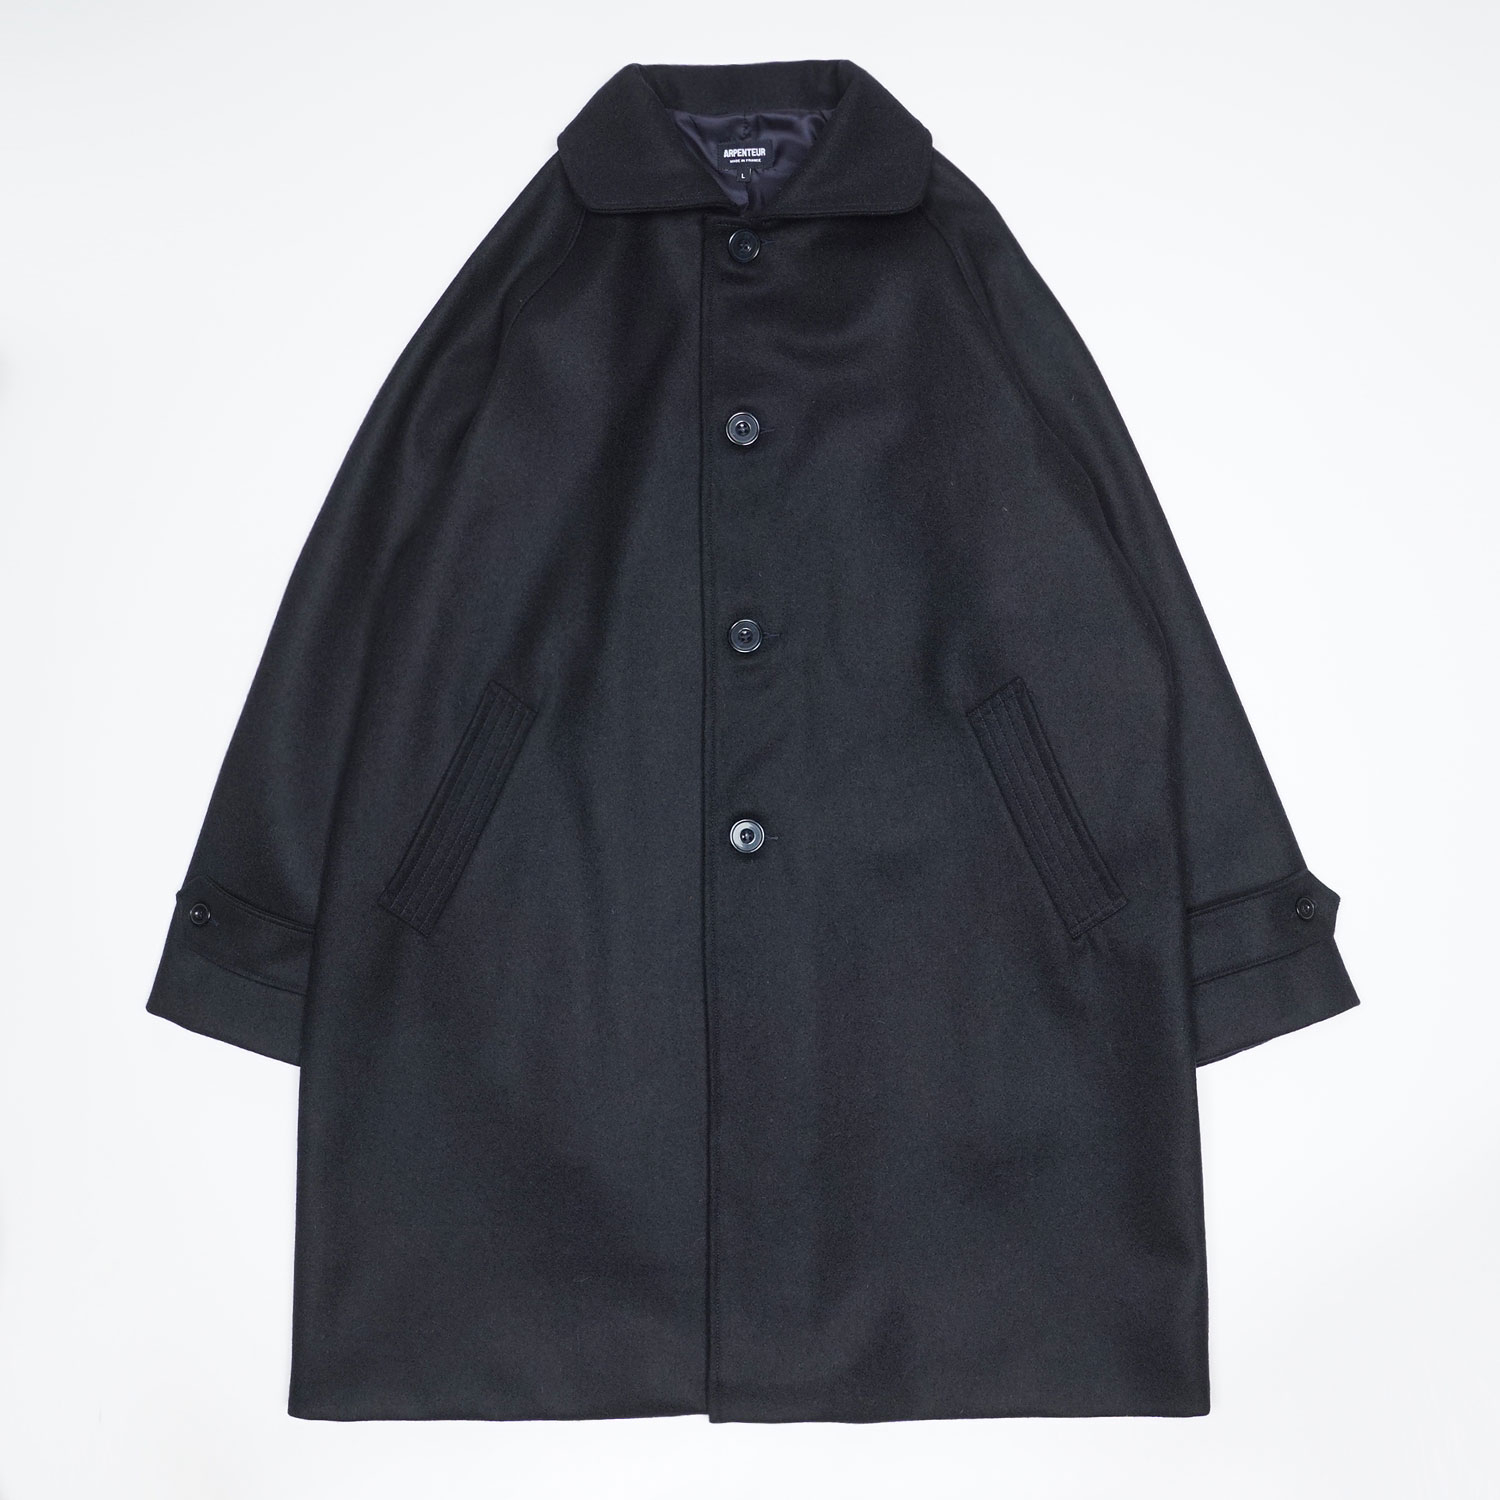 UTILE coat in Midnight blue color by Arpenteur